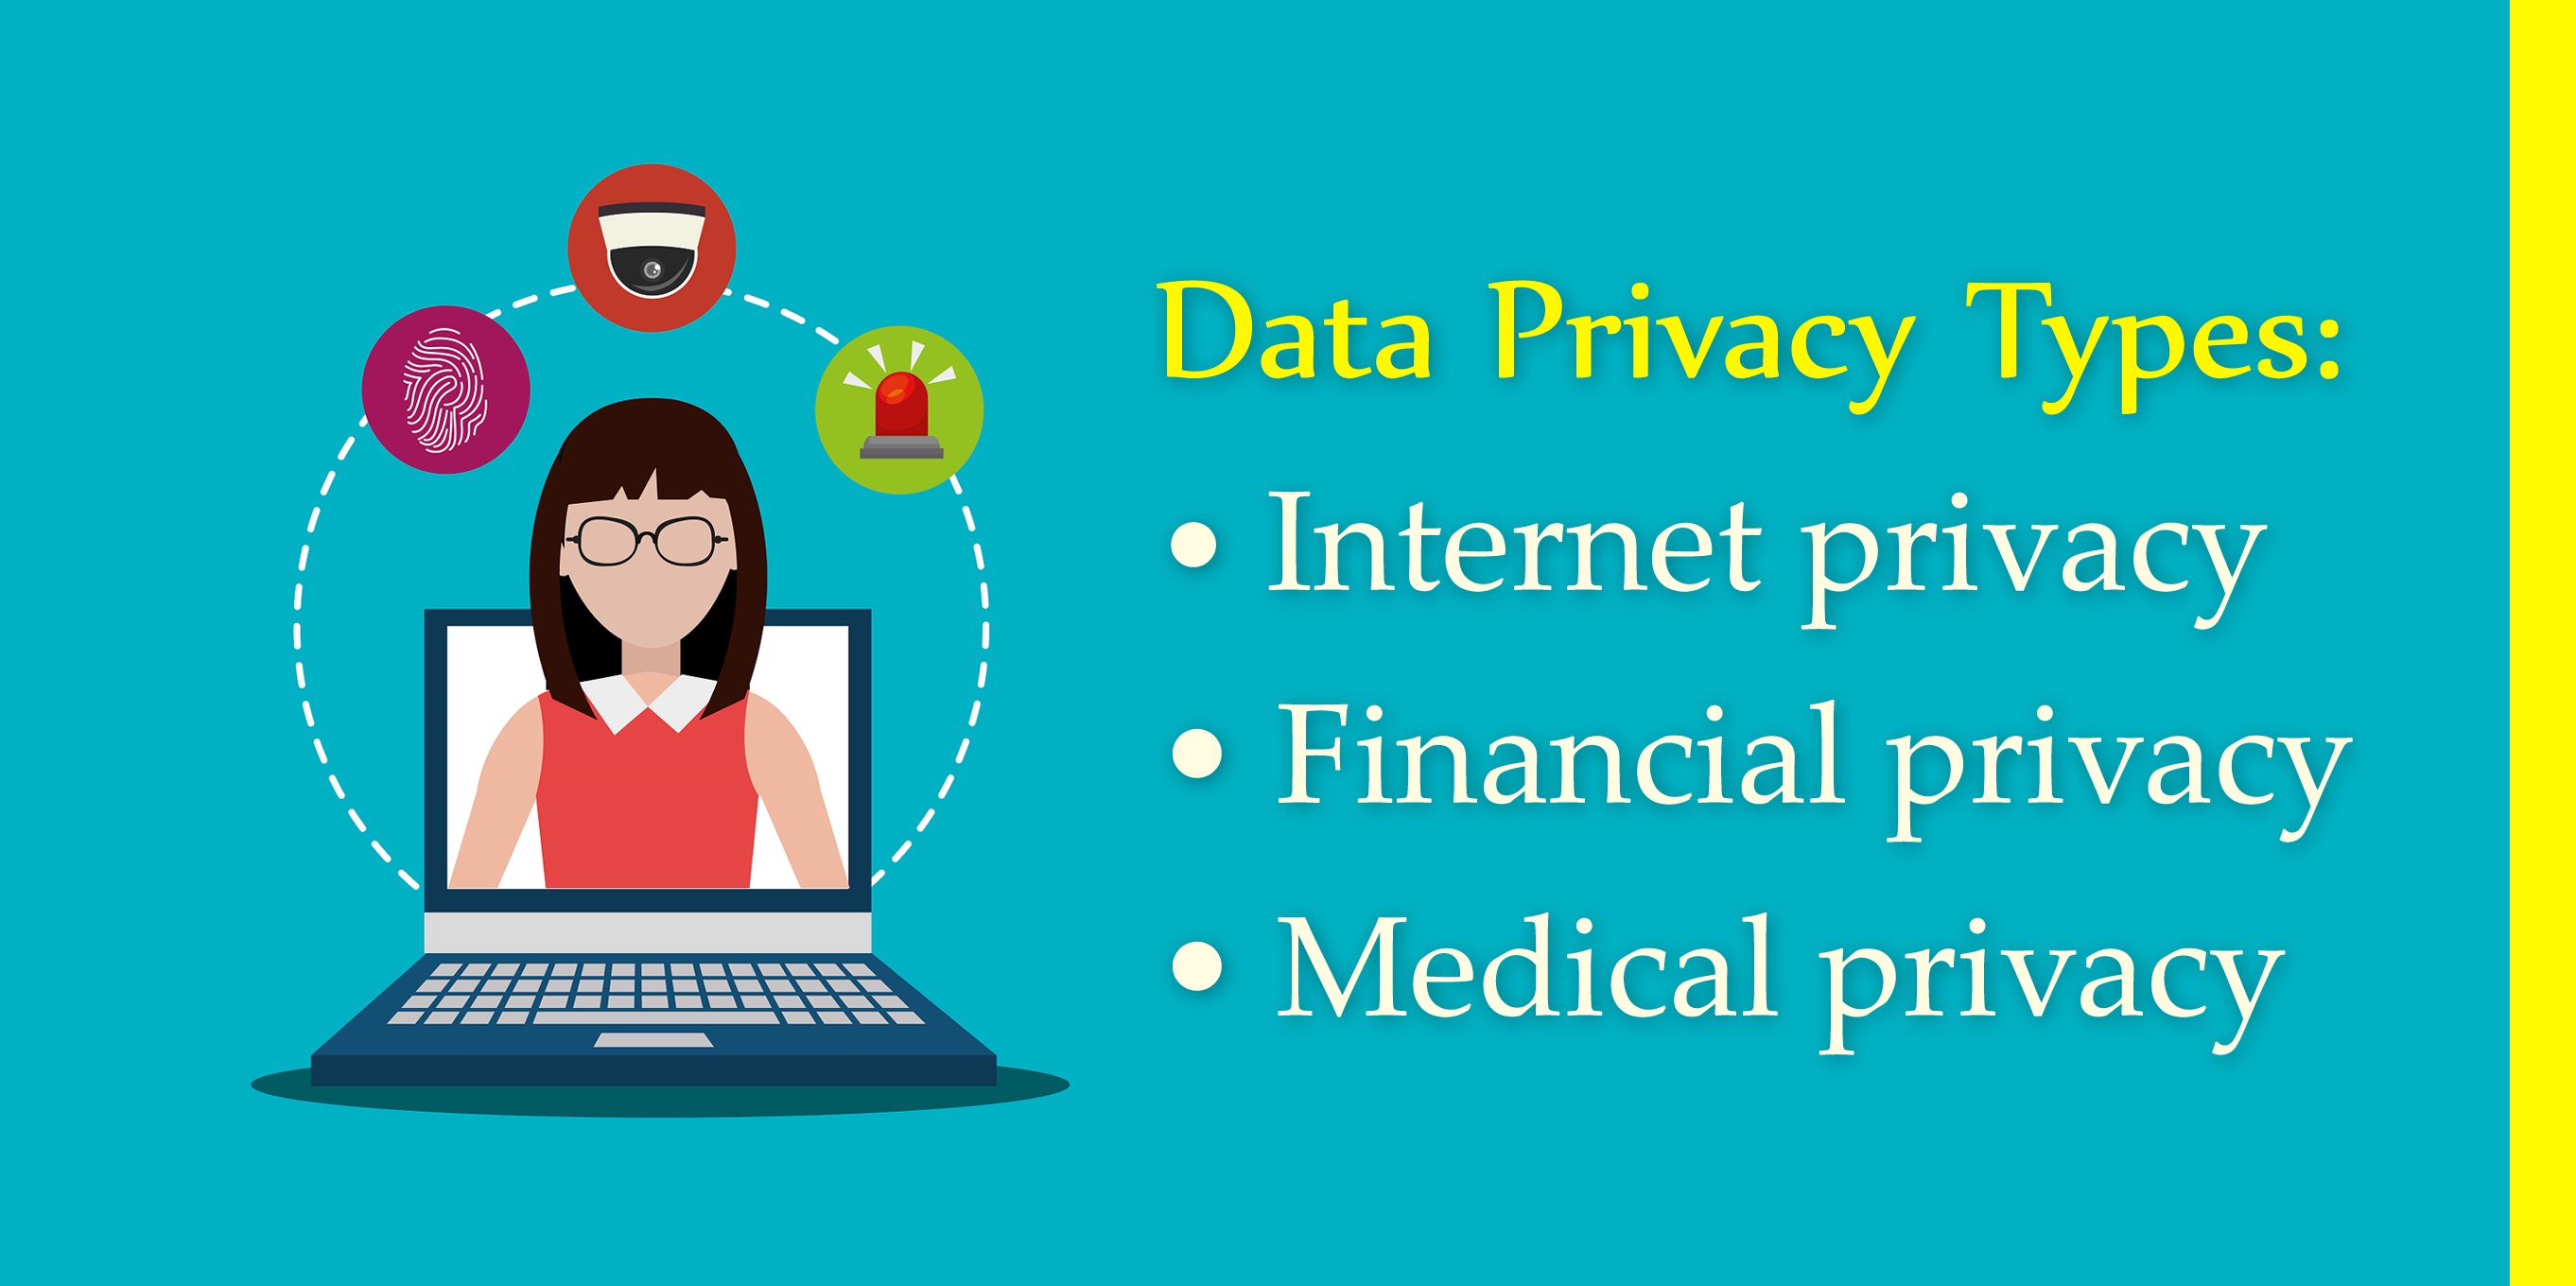 Data Privacy Types